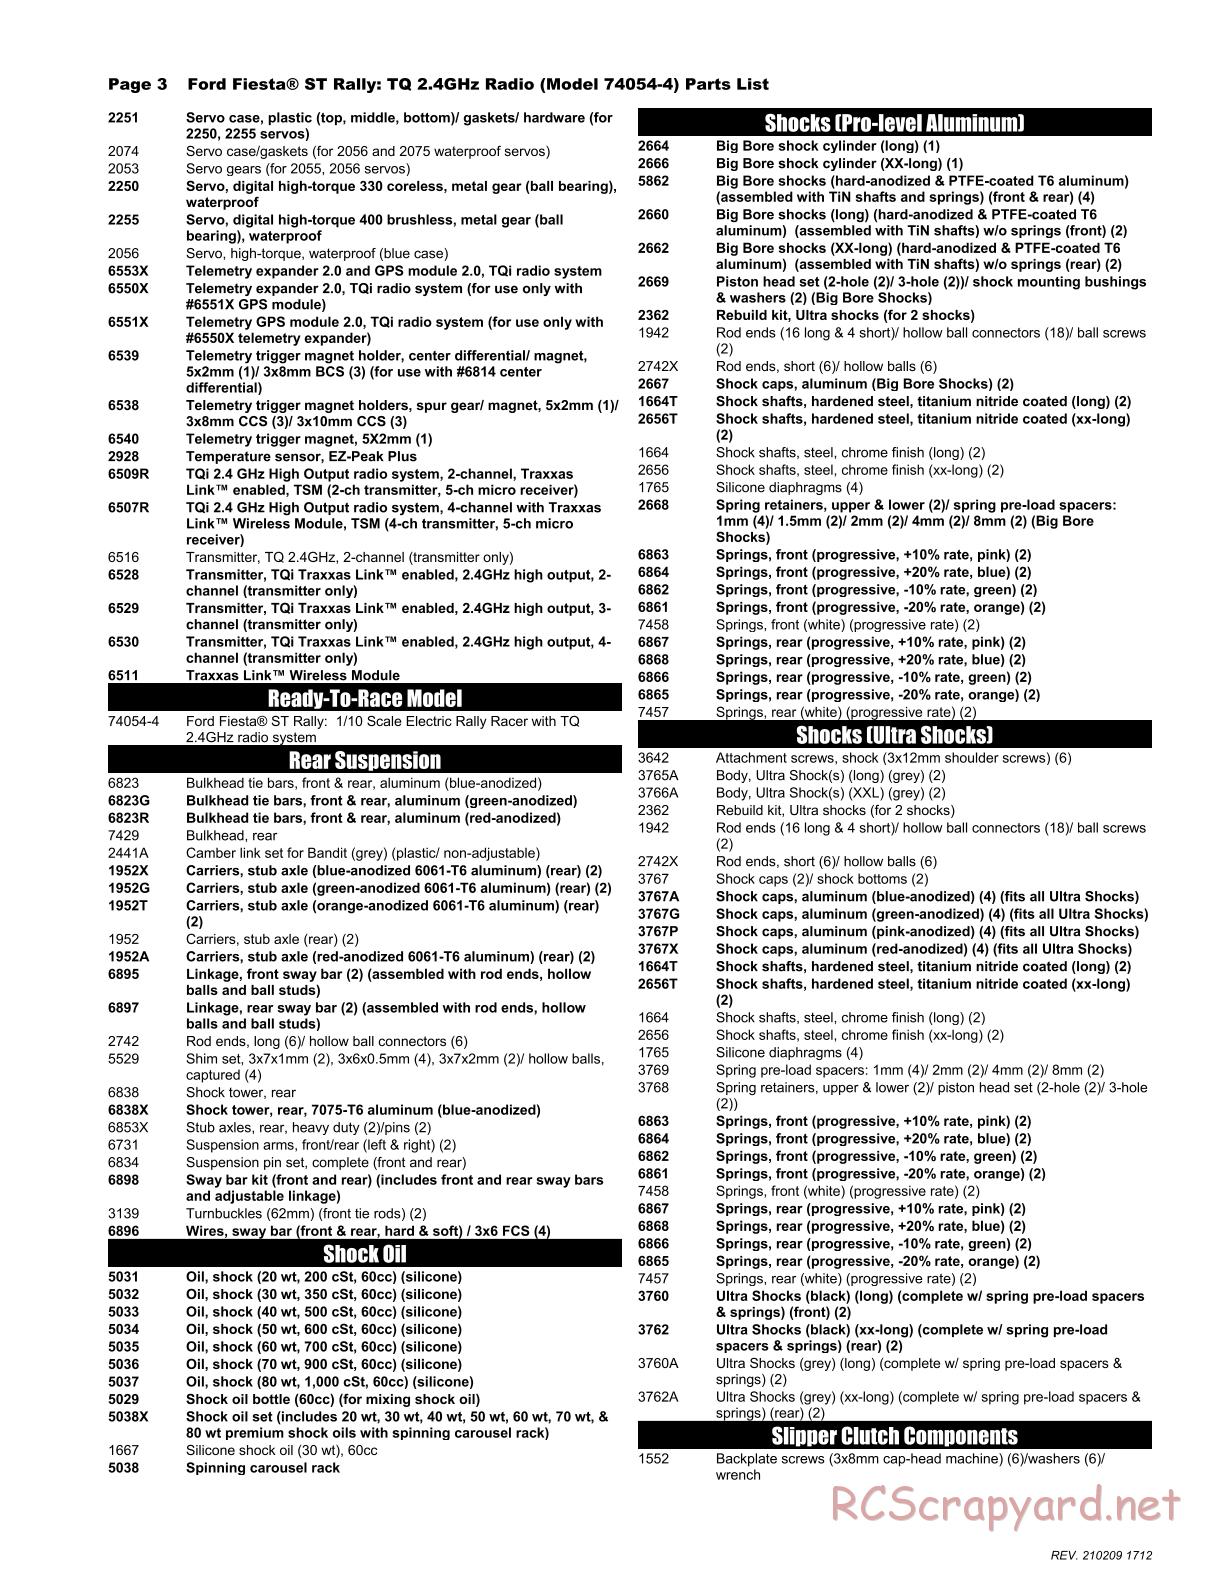 Traxxas - Ford Fiesta ST Rally - Parts List - Page 3